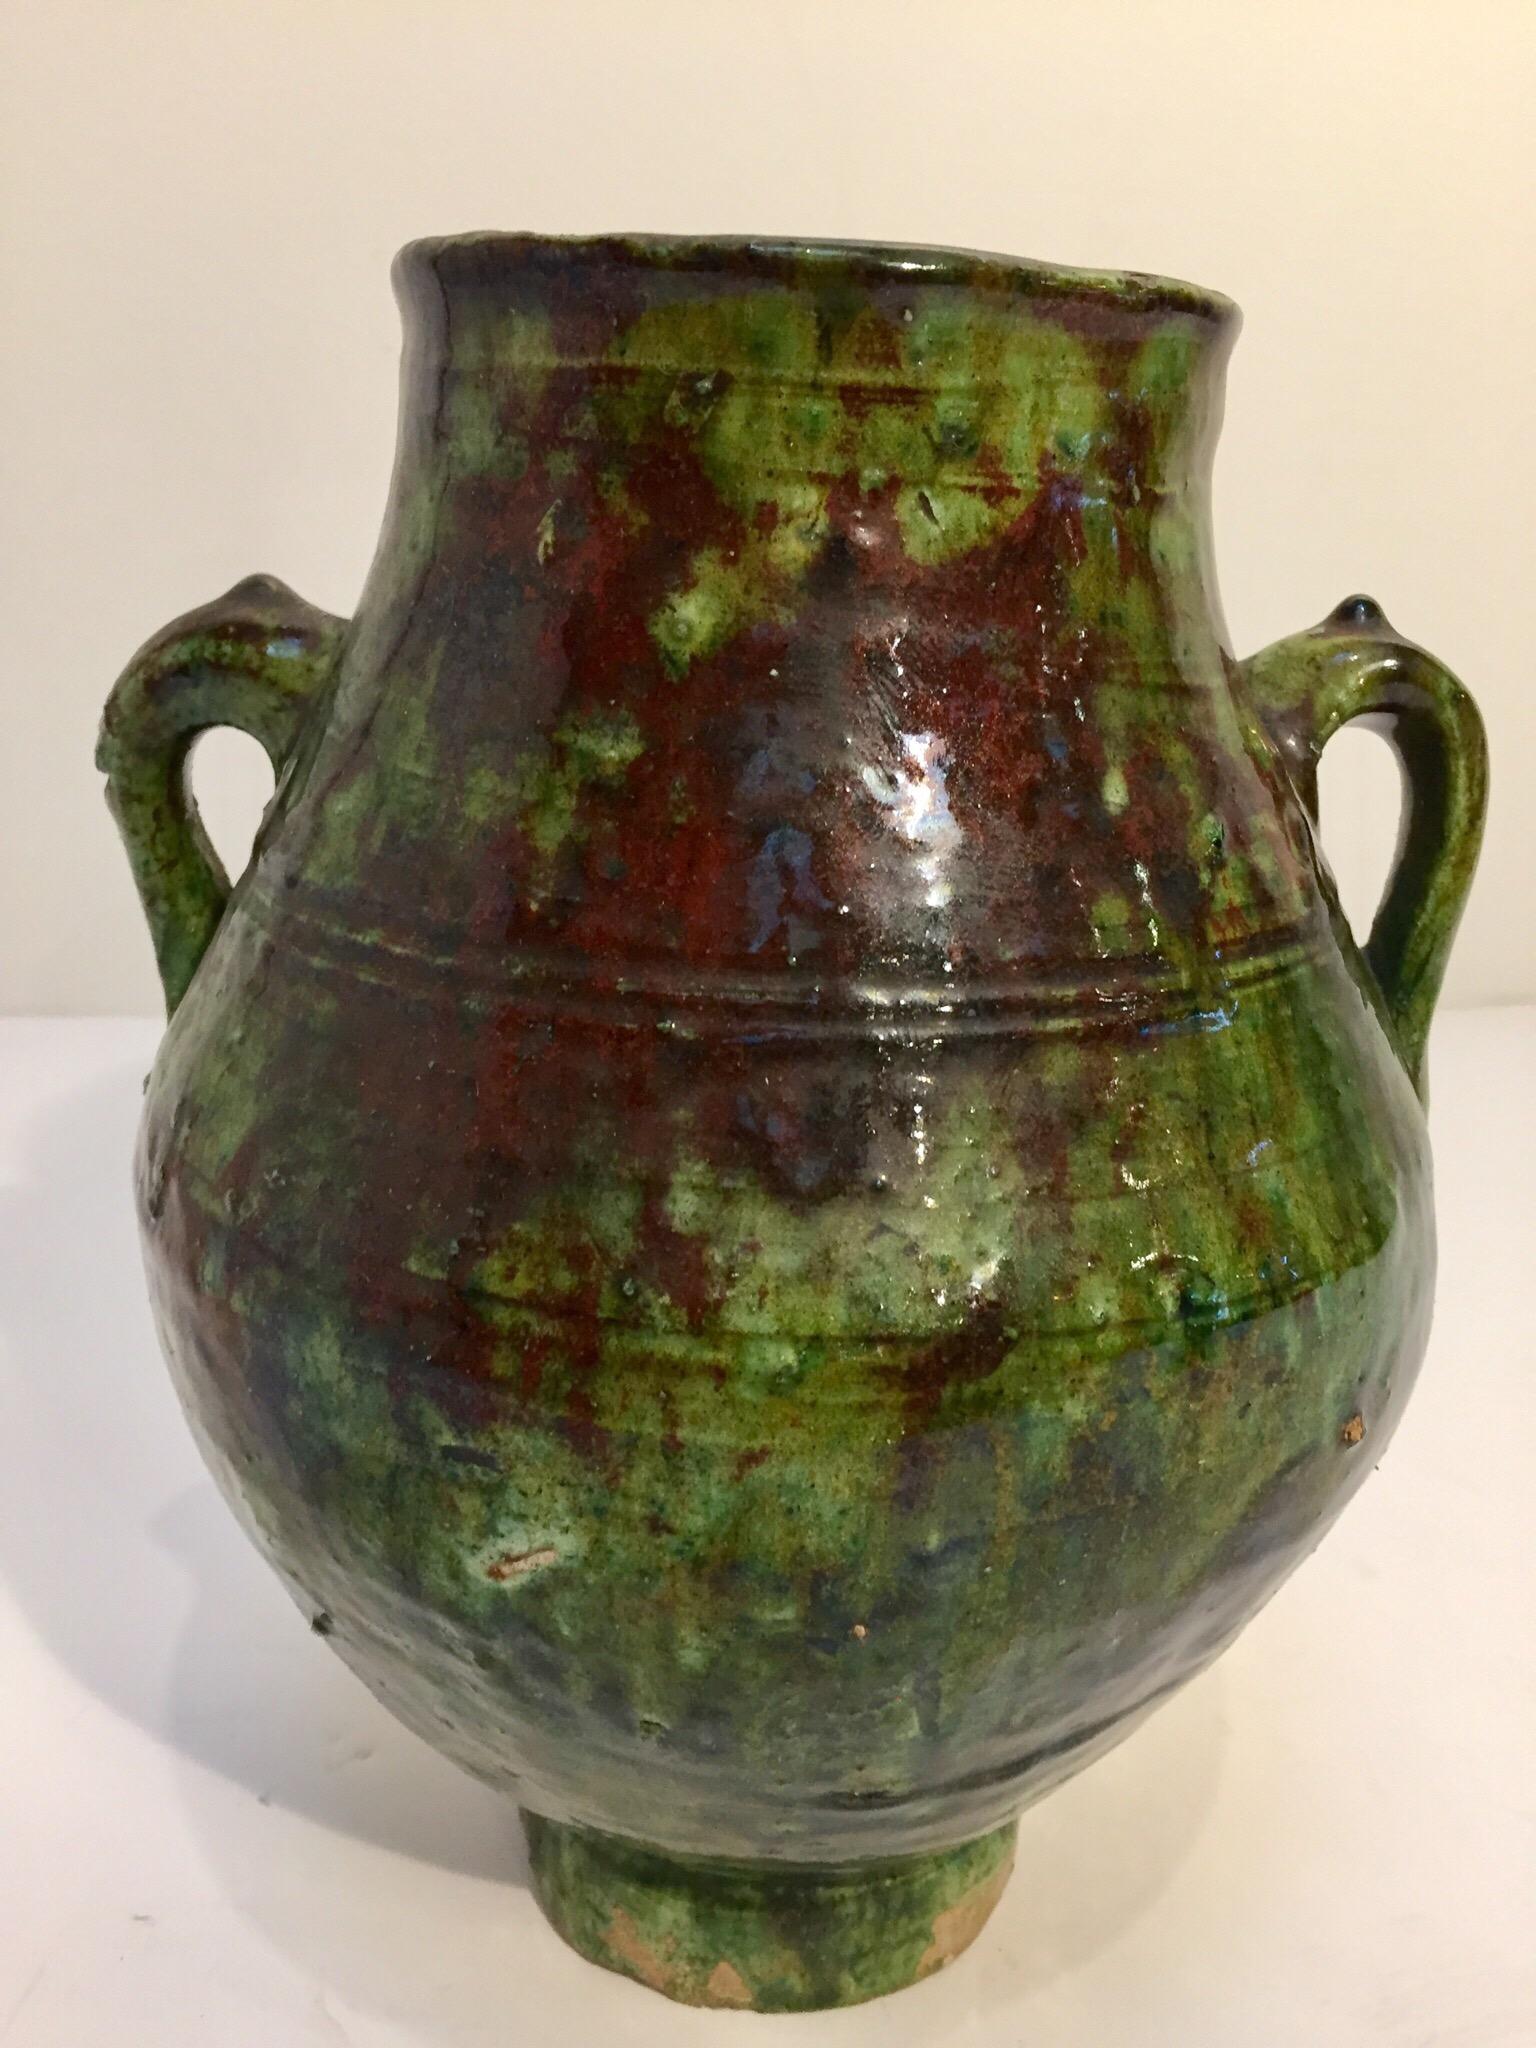 Moroccan Berber green glazed decorative terra cotta jar with handles.
Wonderful green and brown shimmering that can be found only in south Morocco in the village of Tamgroute..
These vintage tribal handcrafted green jars were used to store olive